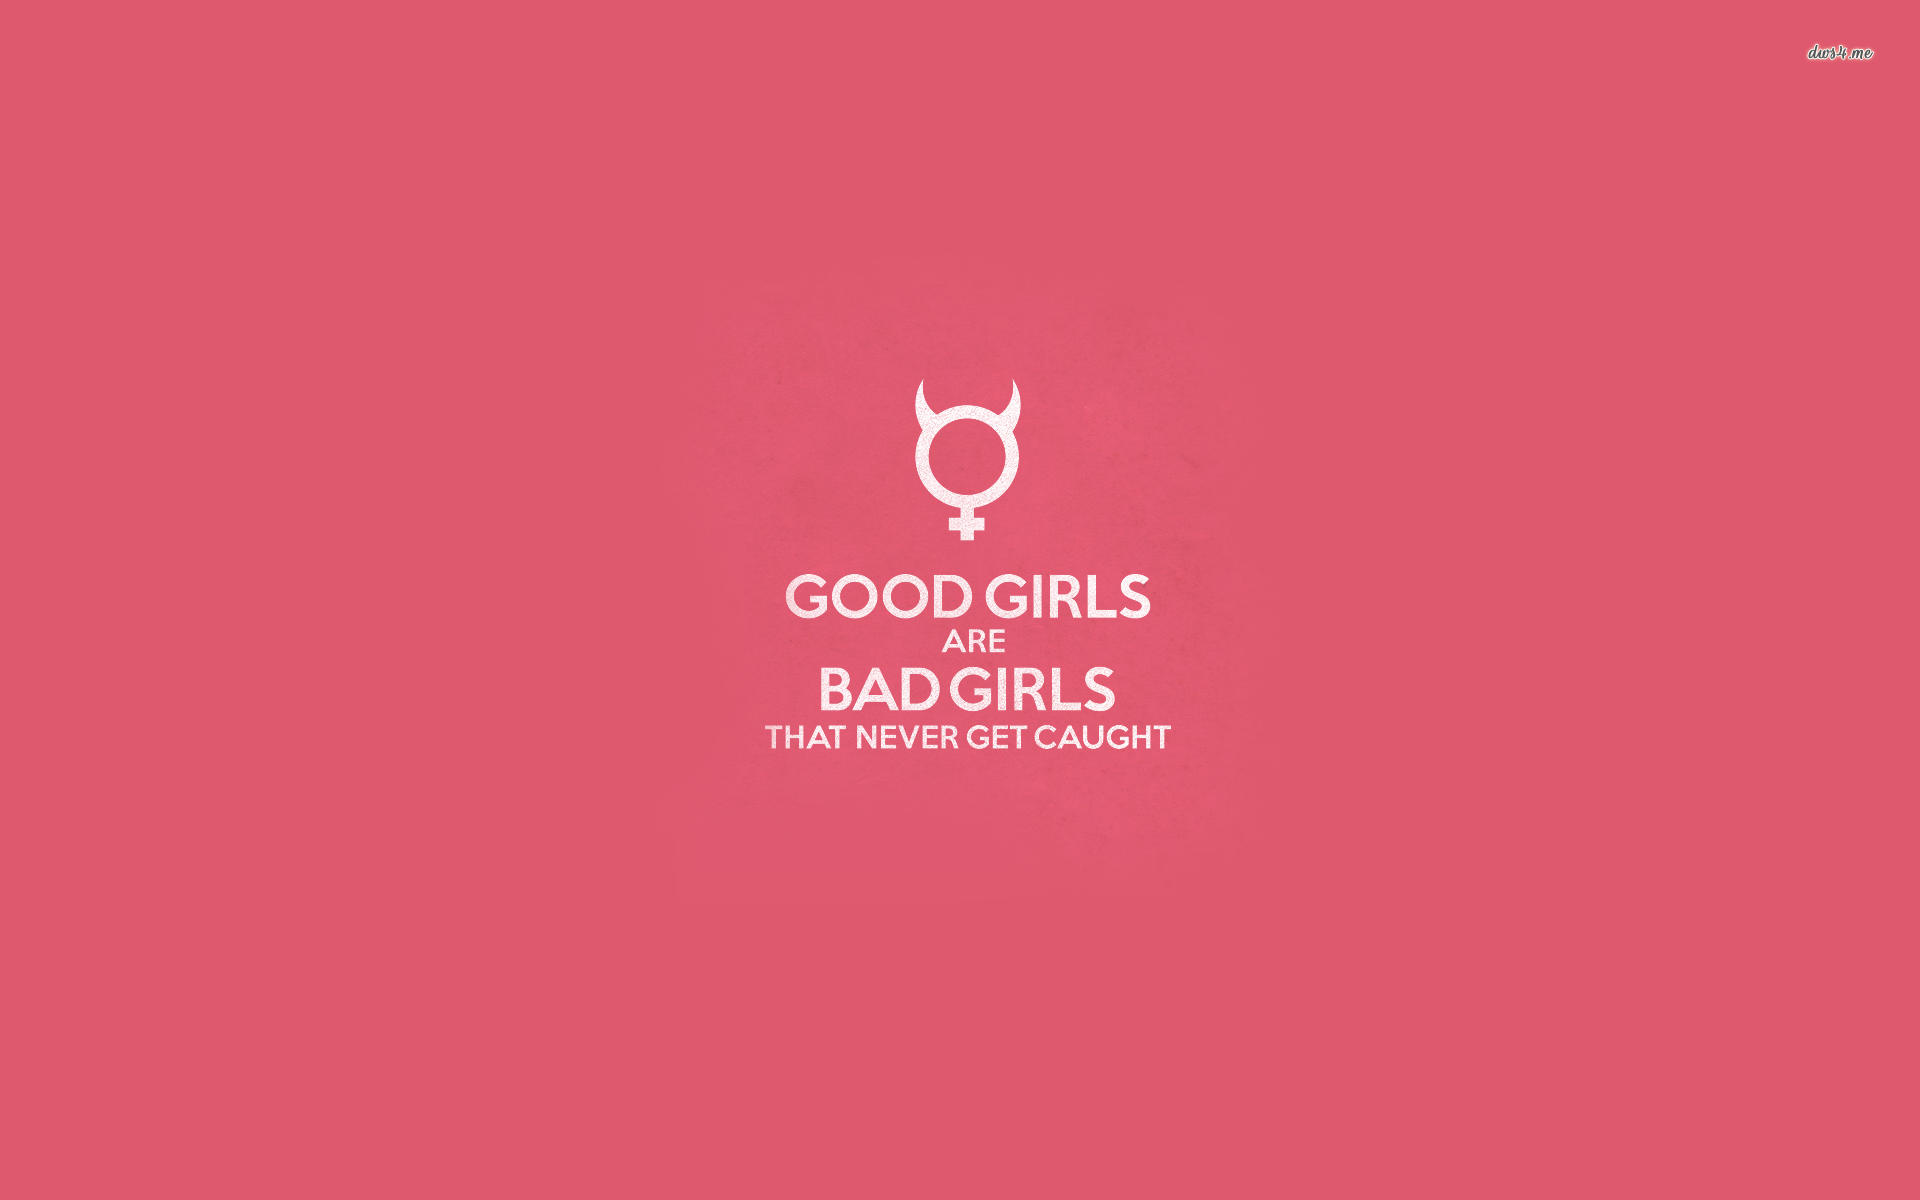 Bad Girl Wallpaper. Bad Wallpaper, Bad Girl Wallpaper and Bad Bitch Boss Wallpaper